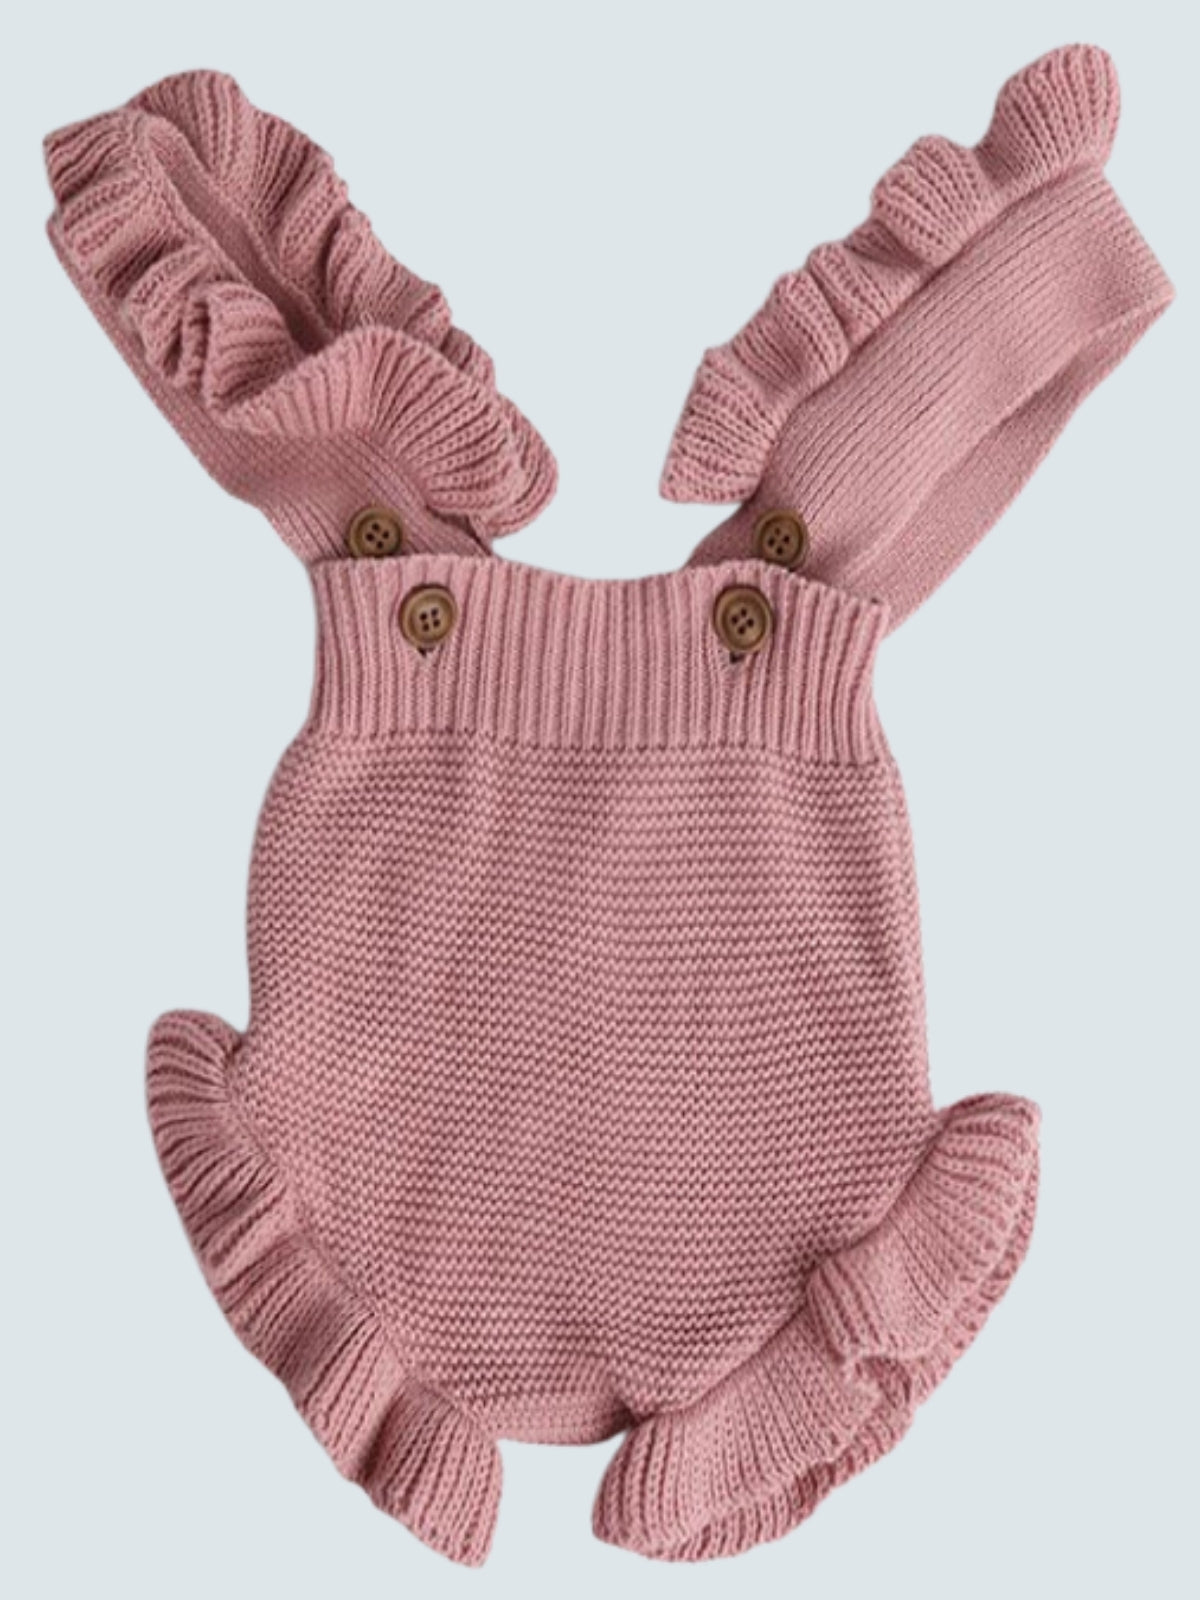 Baby Knice Knit Overall Style Romper Onesie